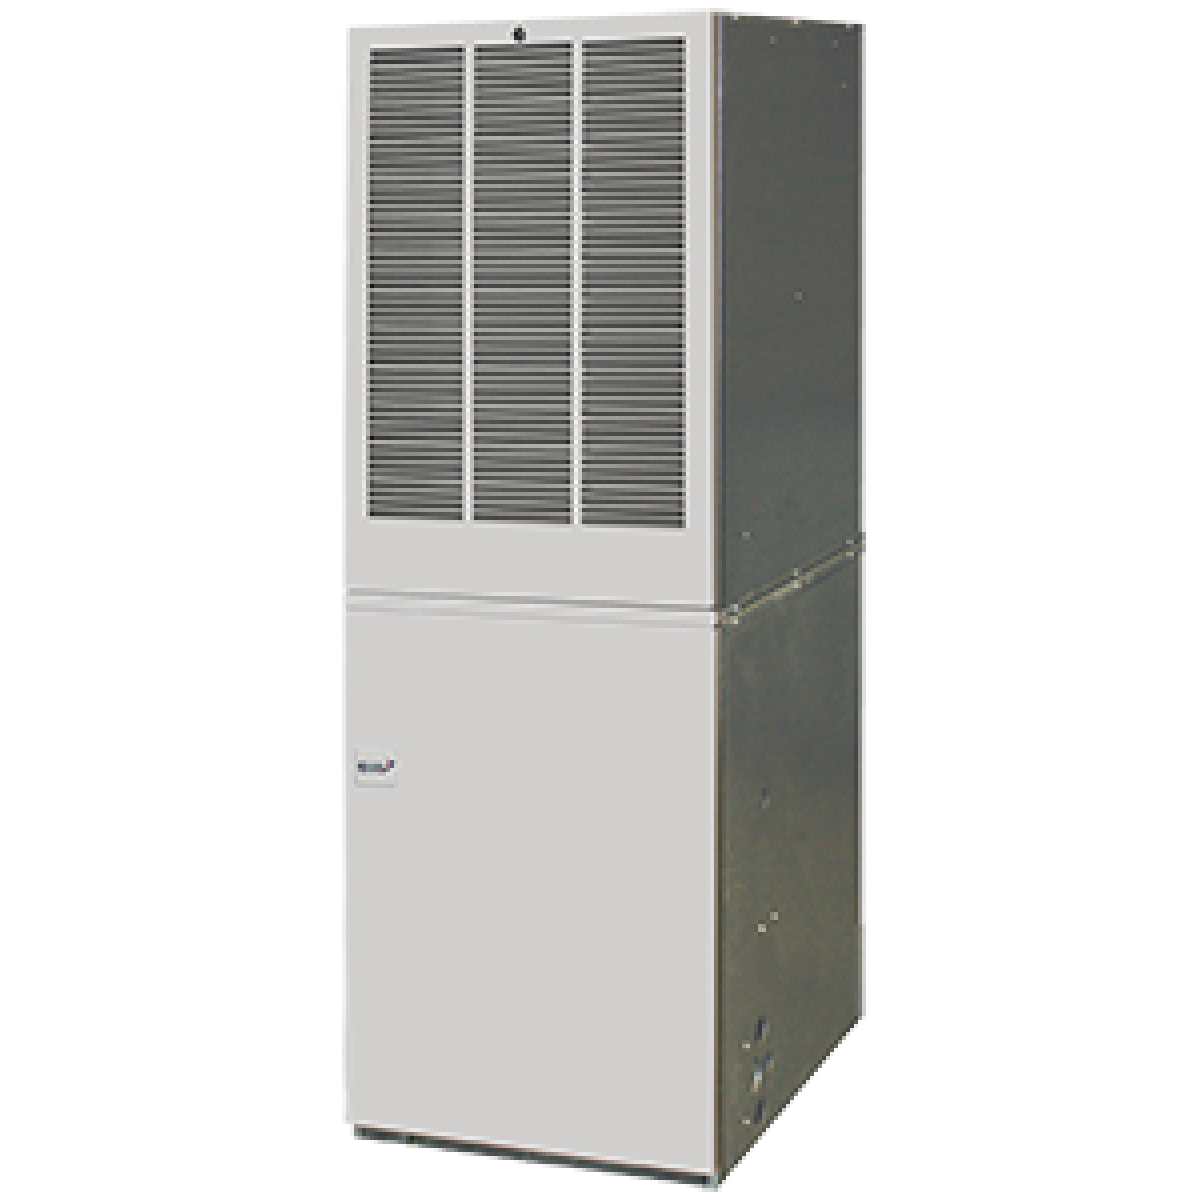 Deluxe 98 Gas Furnace